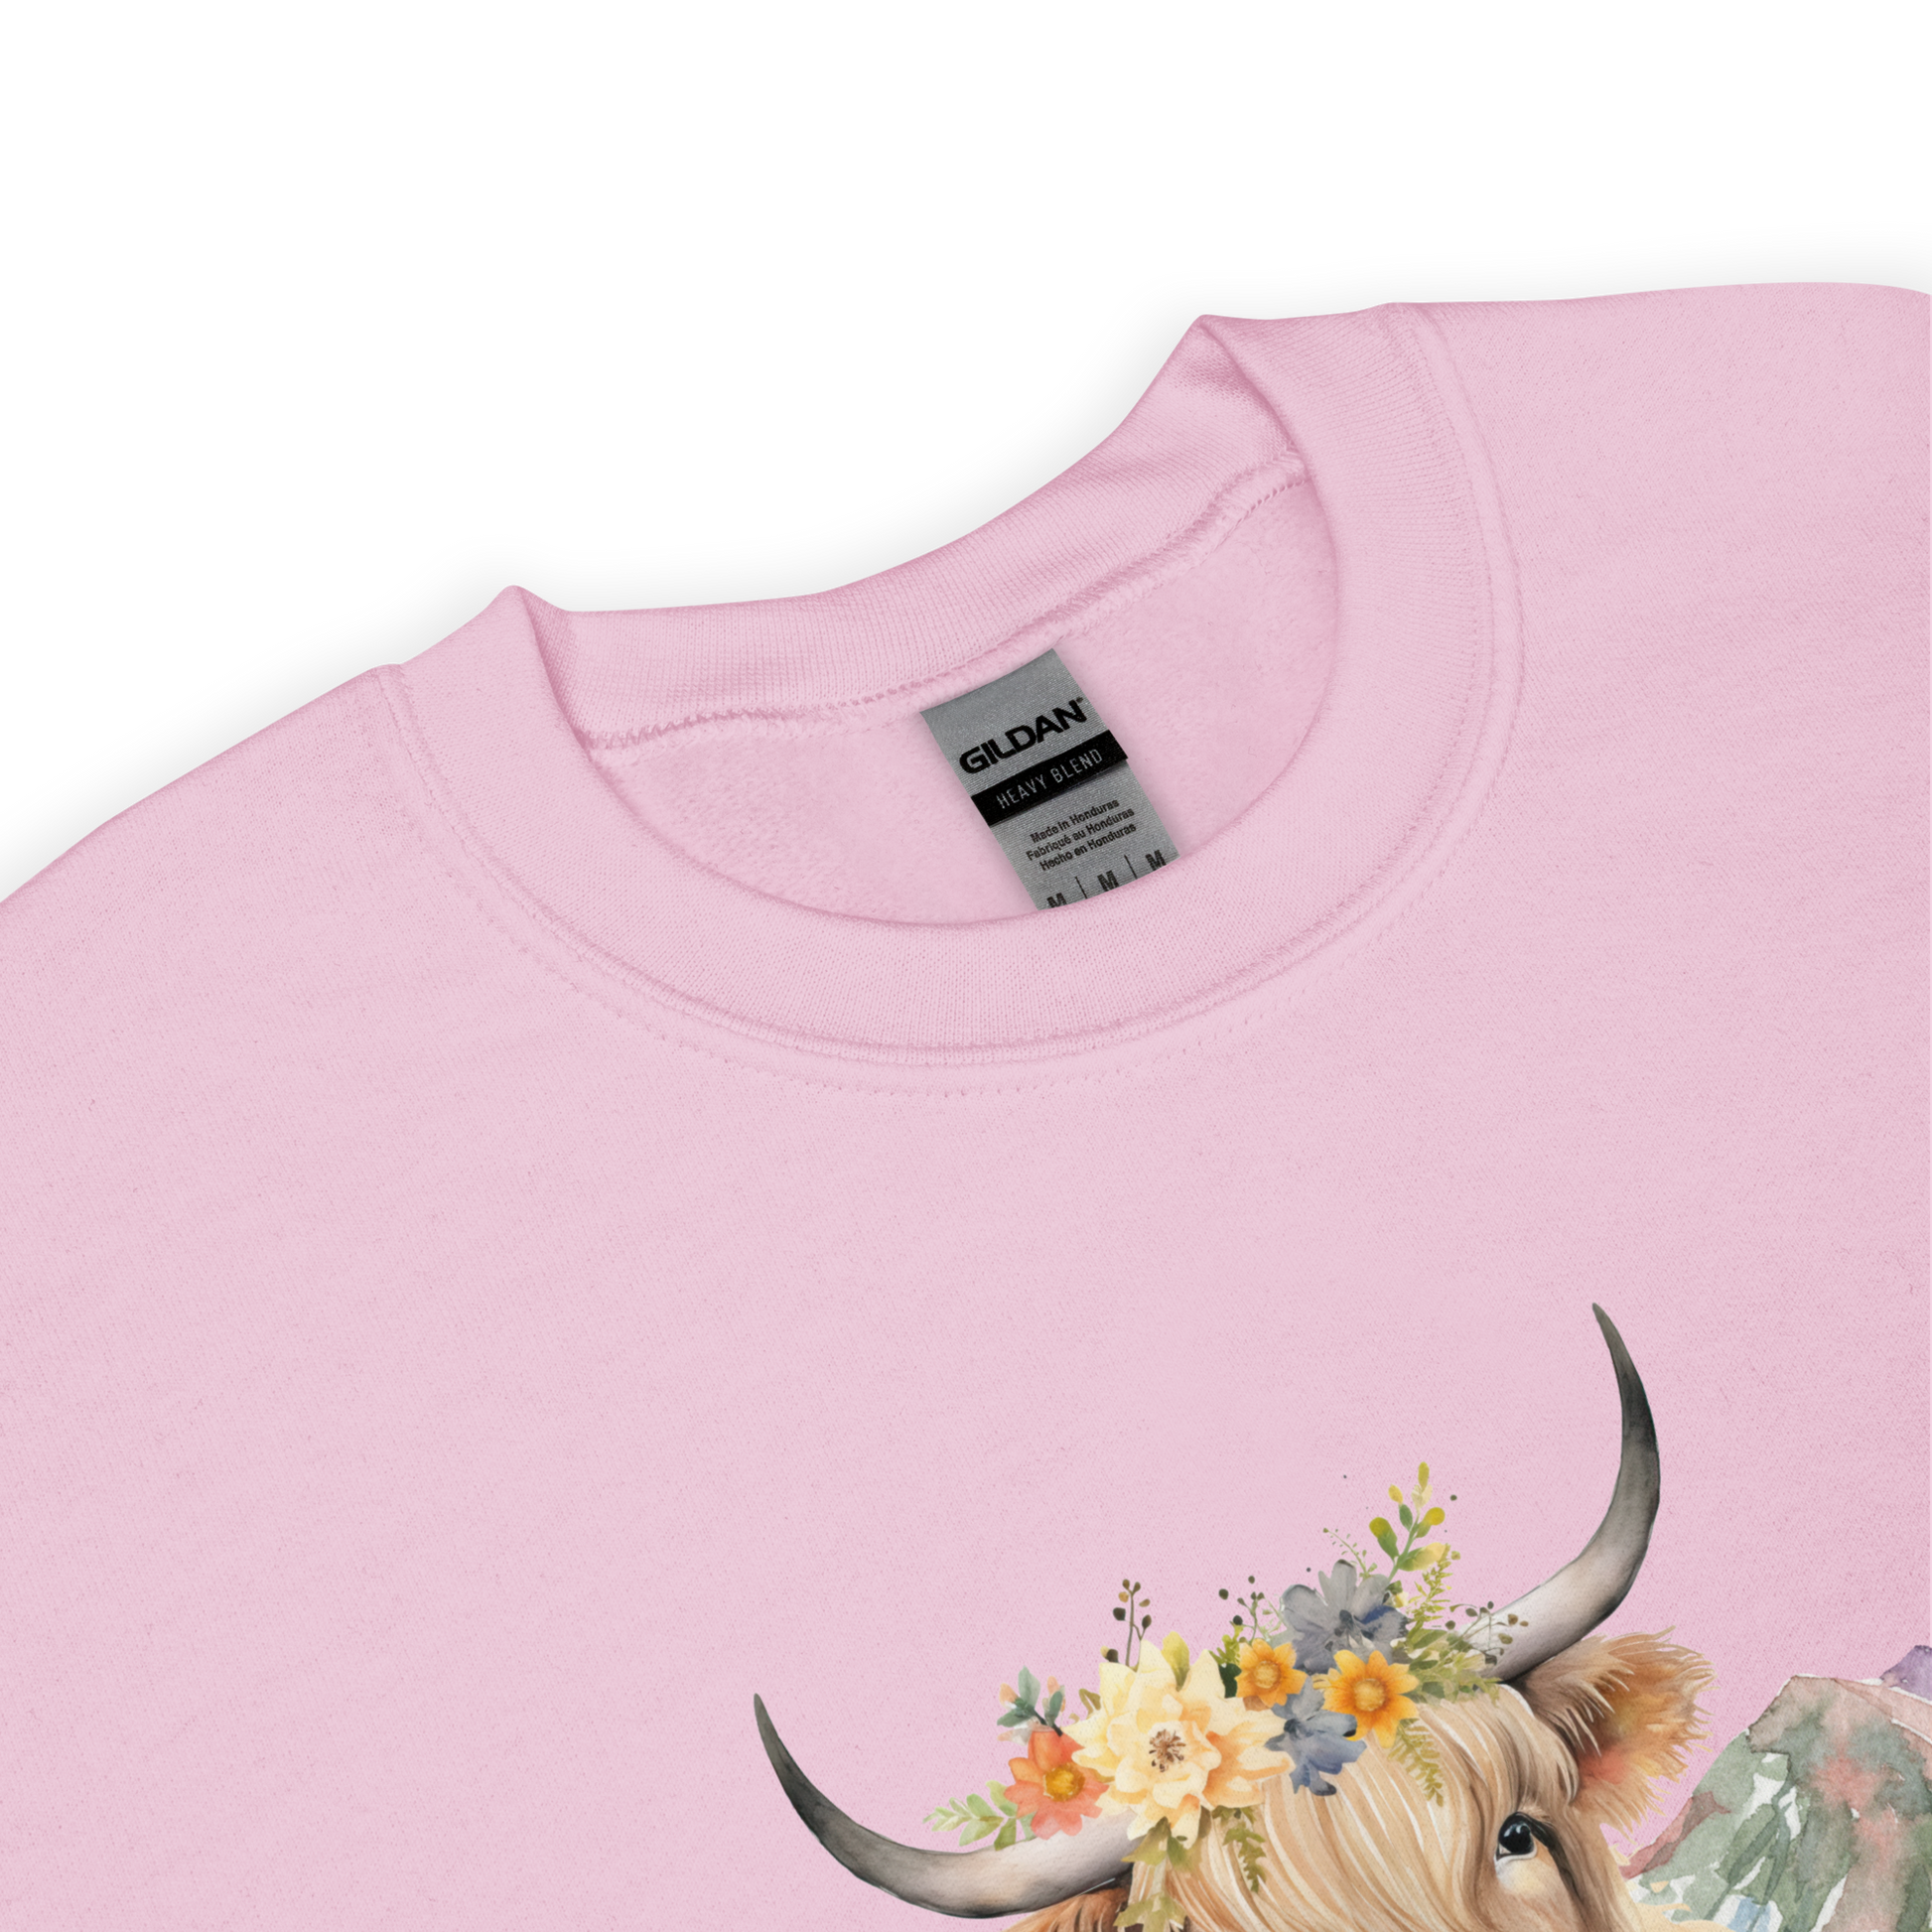 Product details of a Light Pink Highland Cow Sweatshirt featuring an adorable Highland Girl graphic on the chest - Cute Graphic Highland Cow Sweatshirts - Boozy Fox